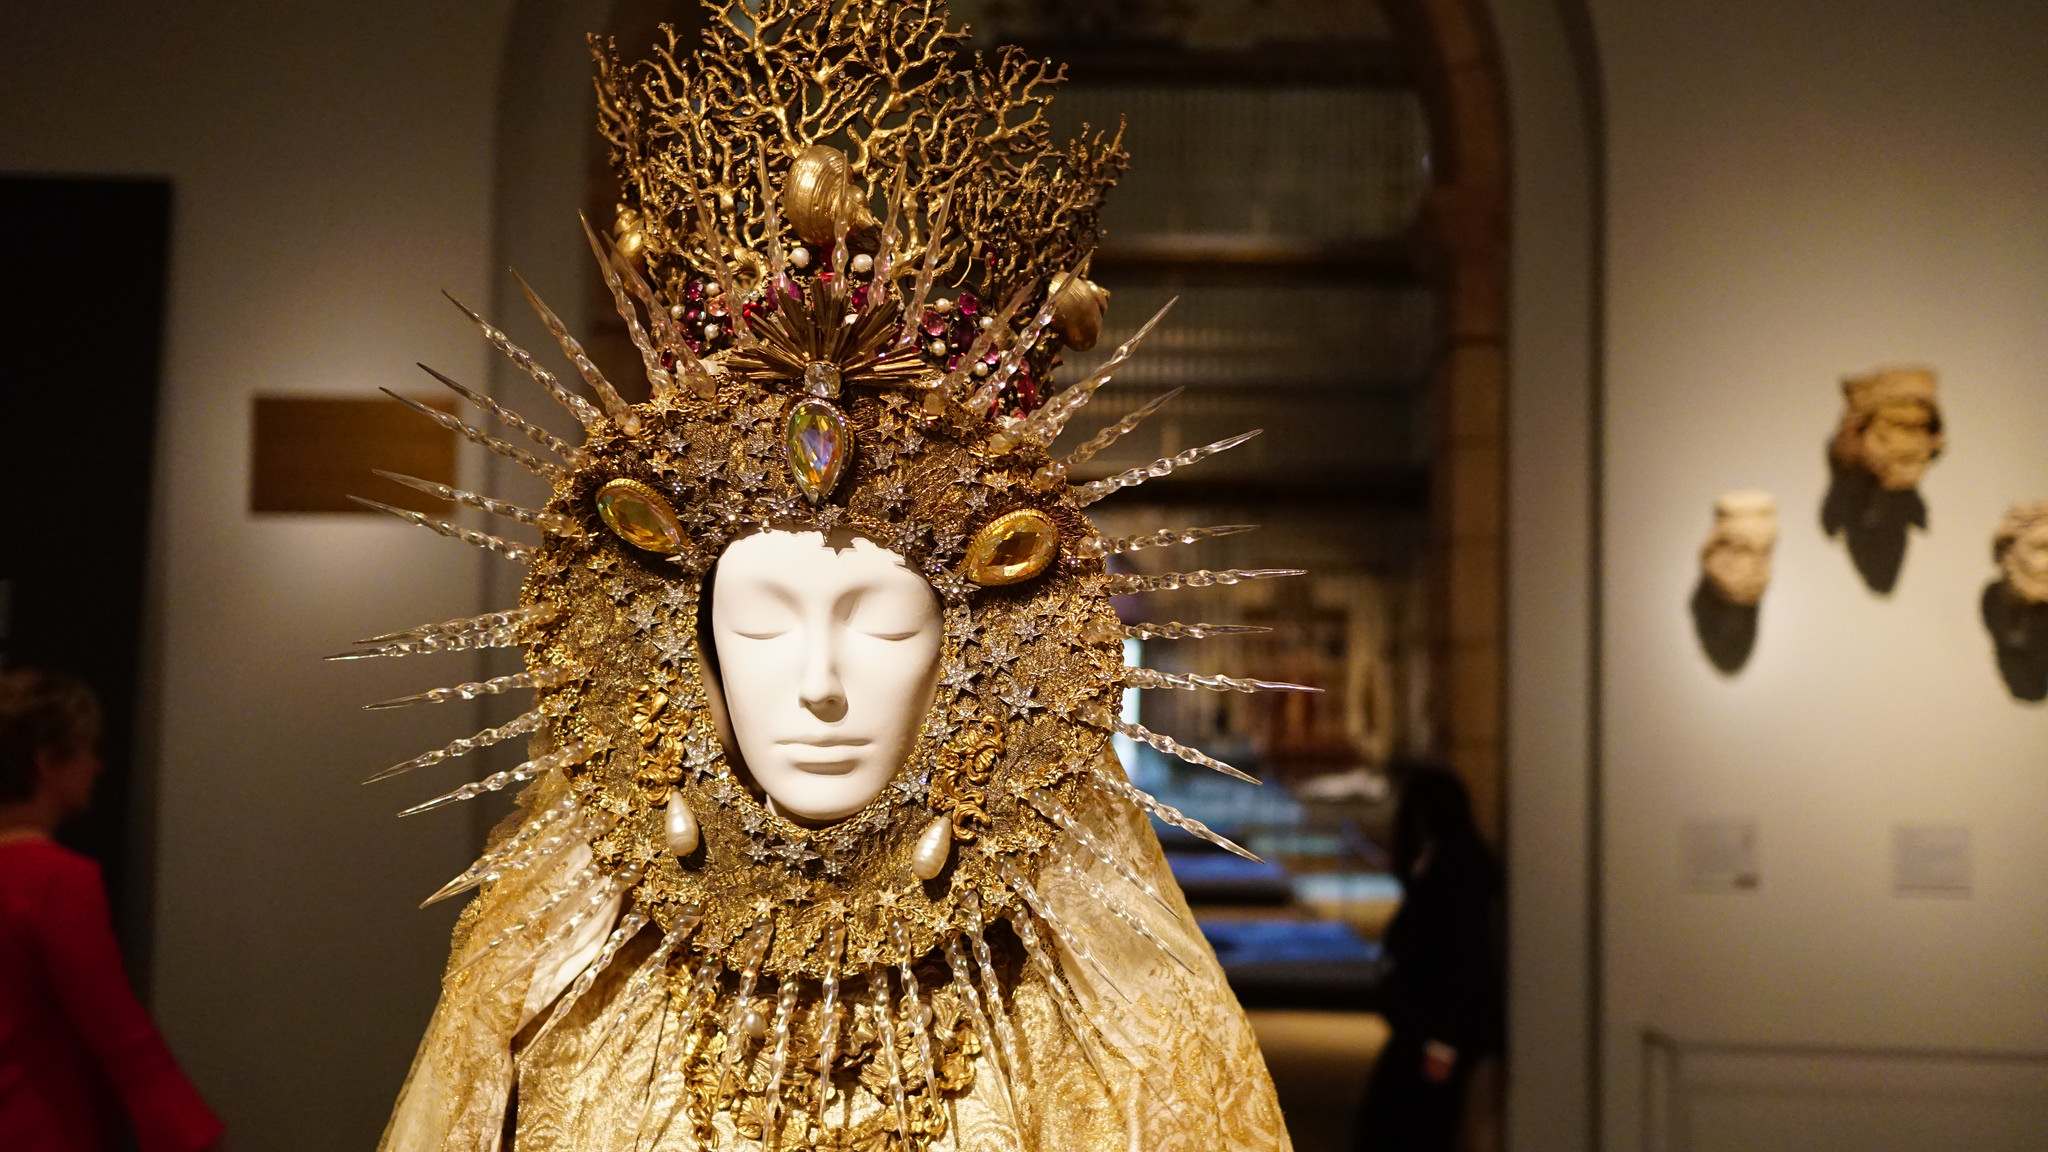 heavenly bodies11 Heavenly Bodies: Fashion and the Catholic Imagination in MET